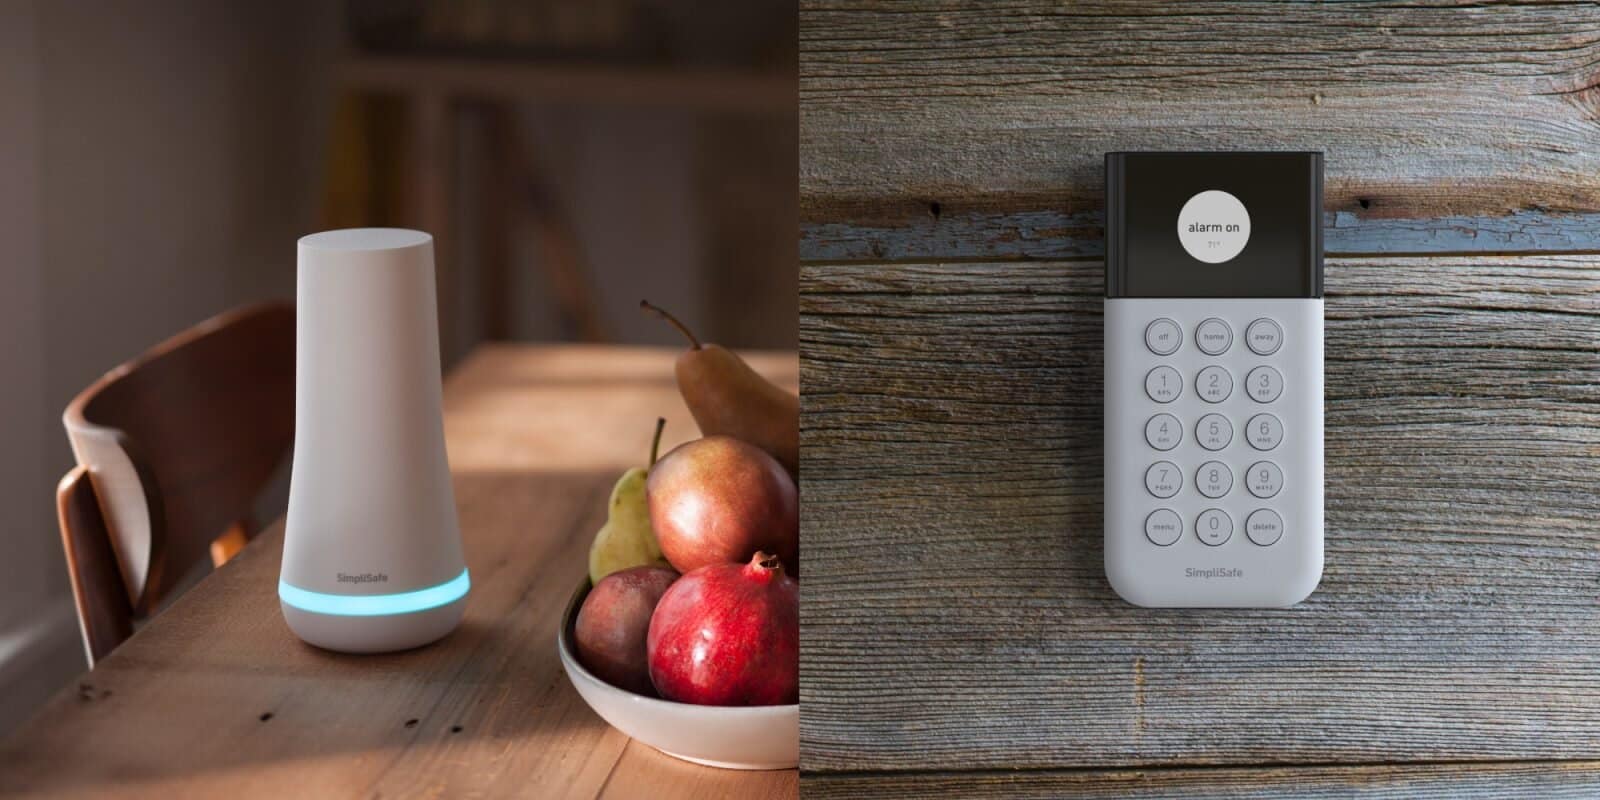 Modern home security devices on wooden surfaces.